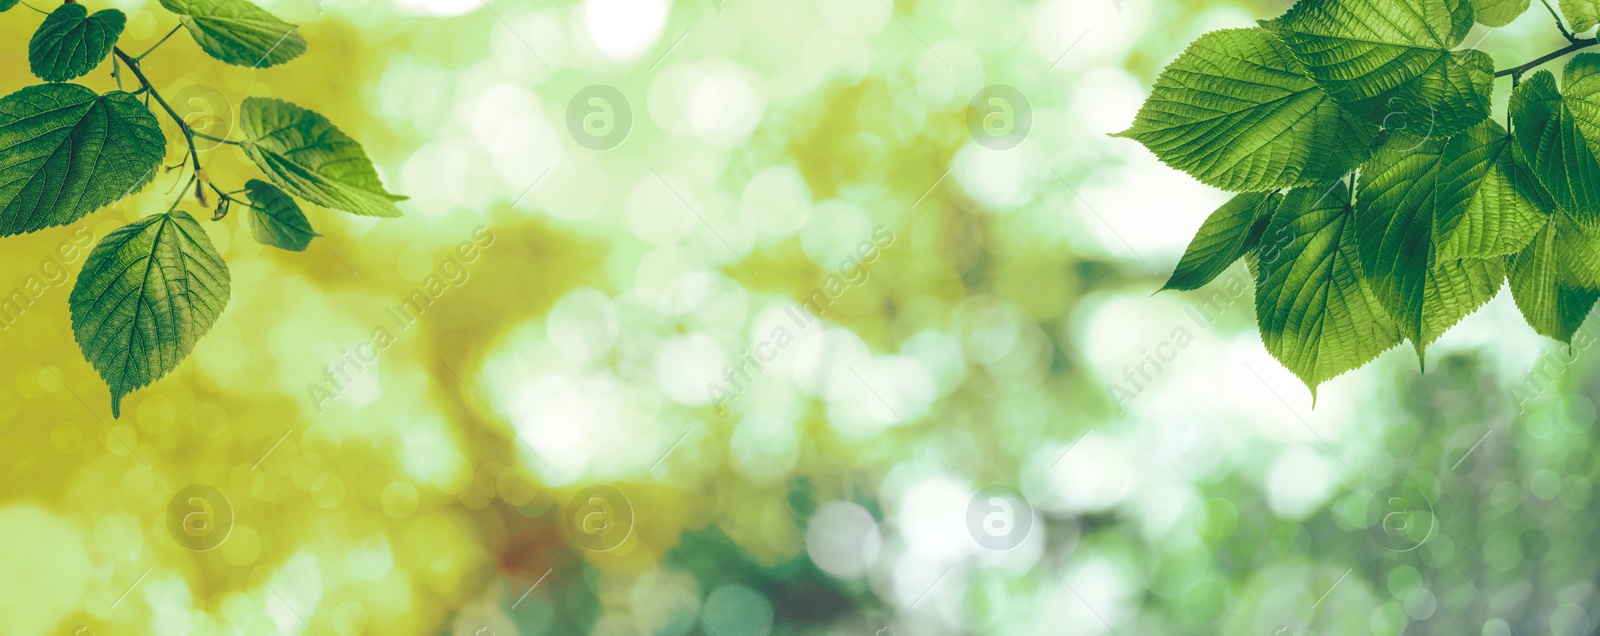 Image of Tree branches with green leaves on sunny day. Banner design